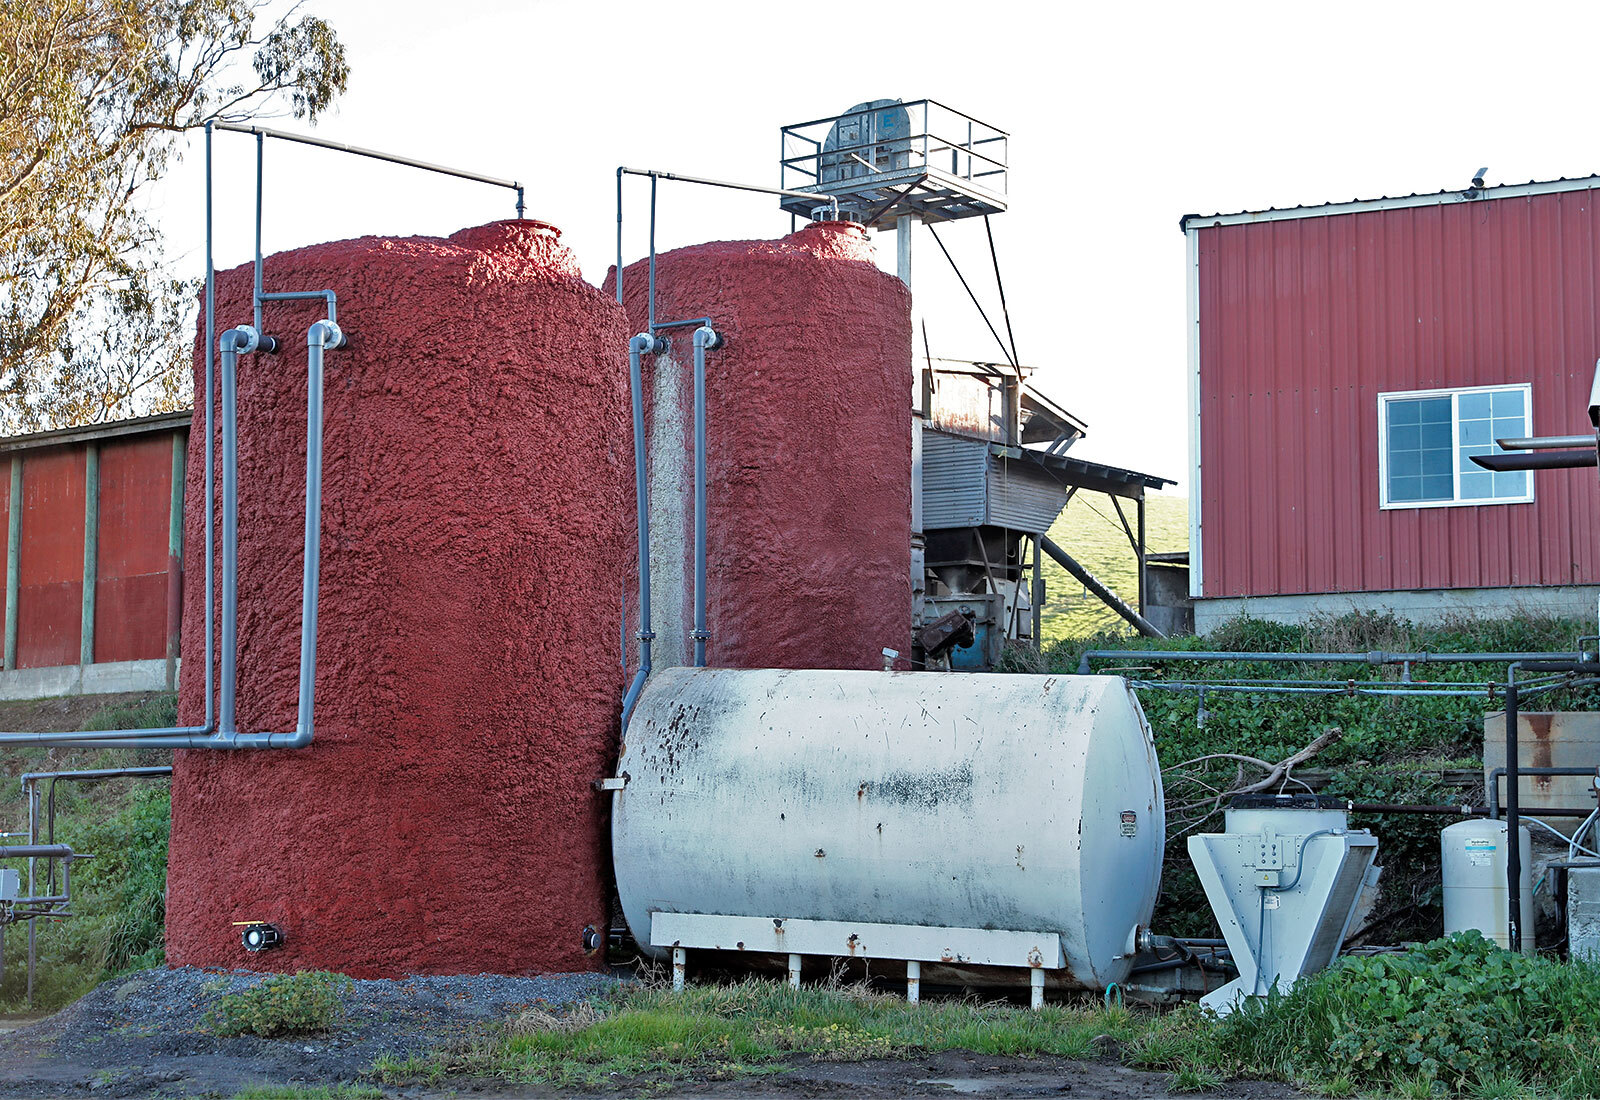 A methane digester stands on Straus Dairy Farm in Marshall, California. May 2022